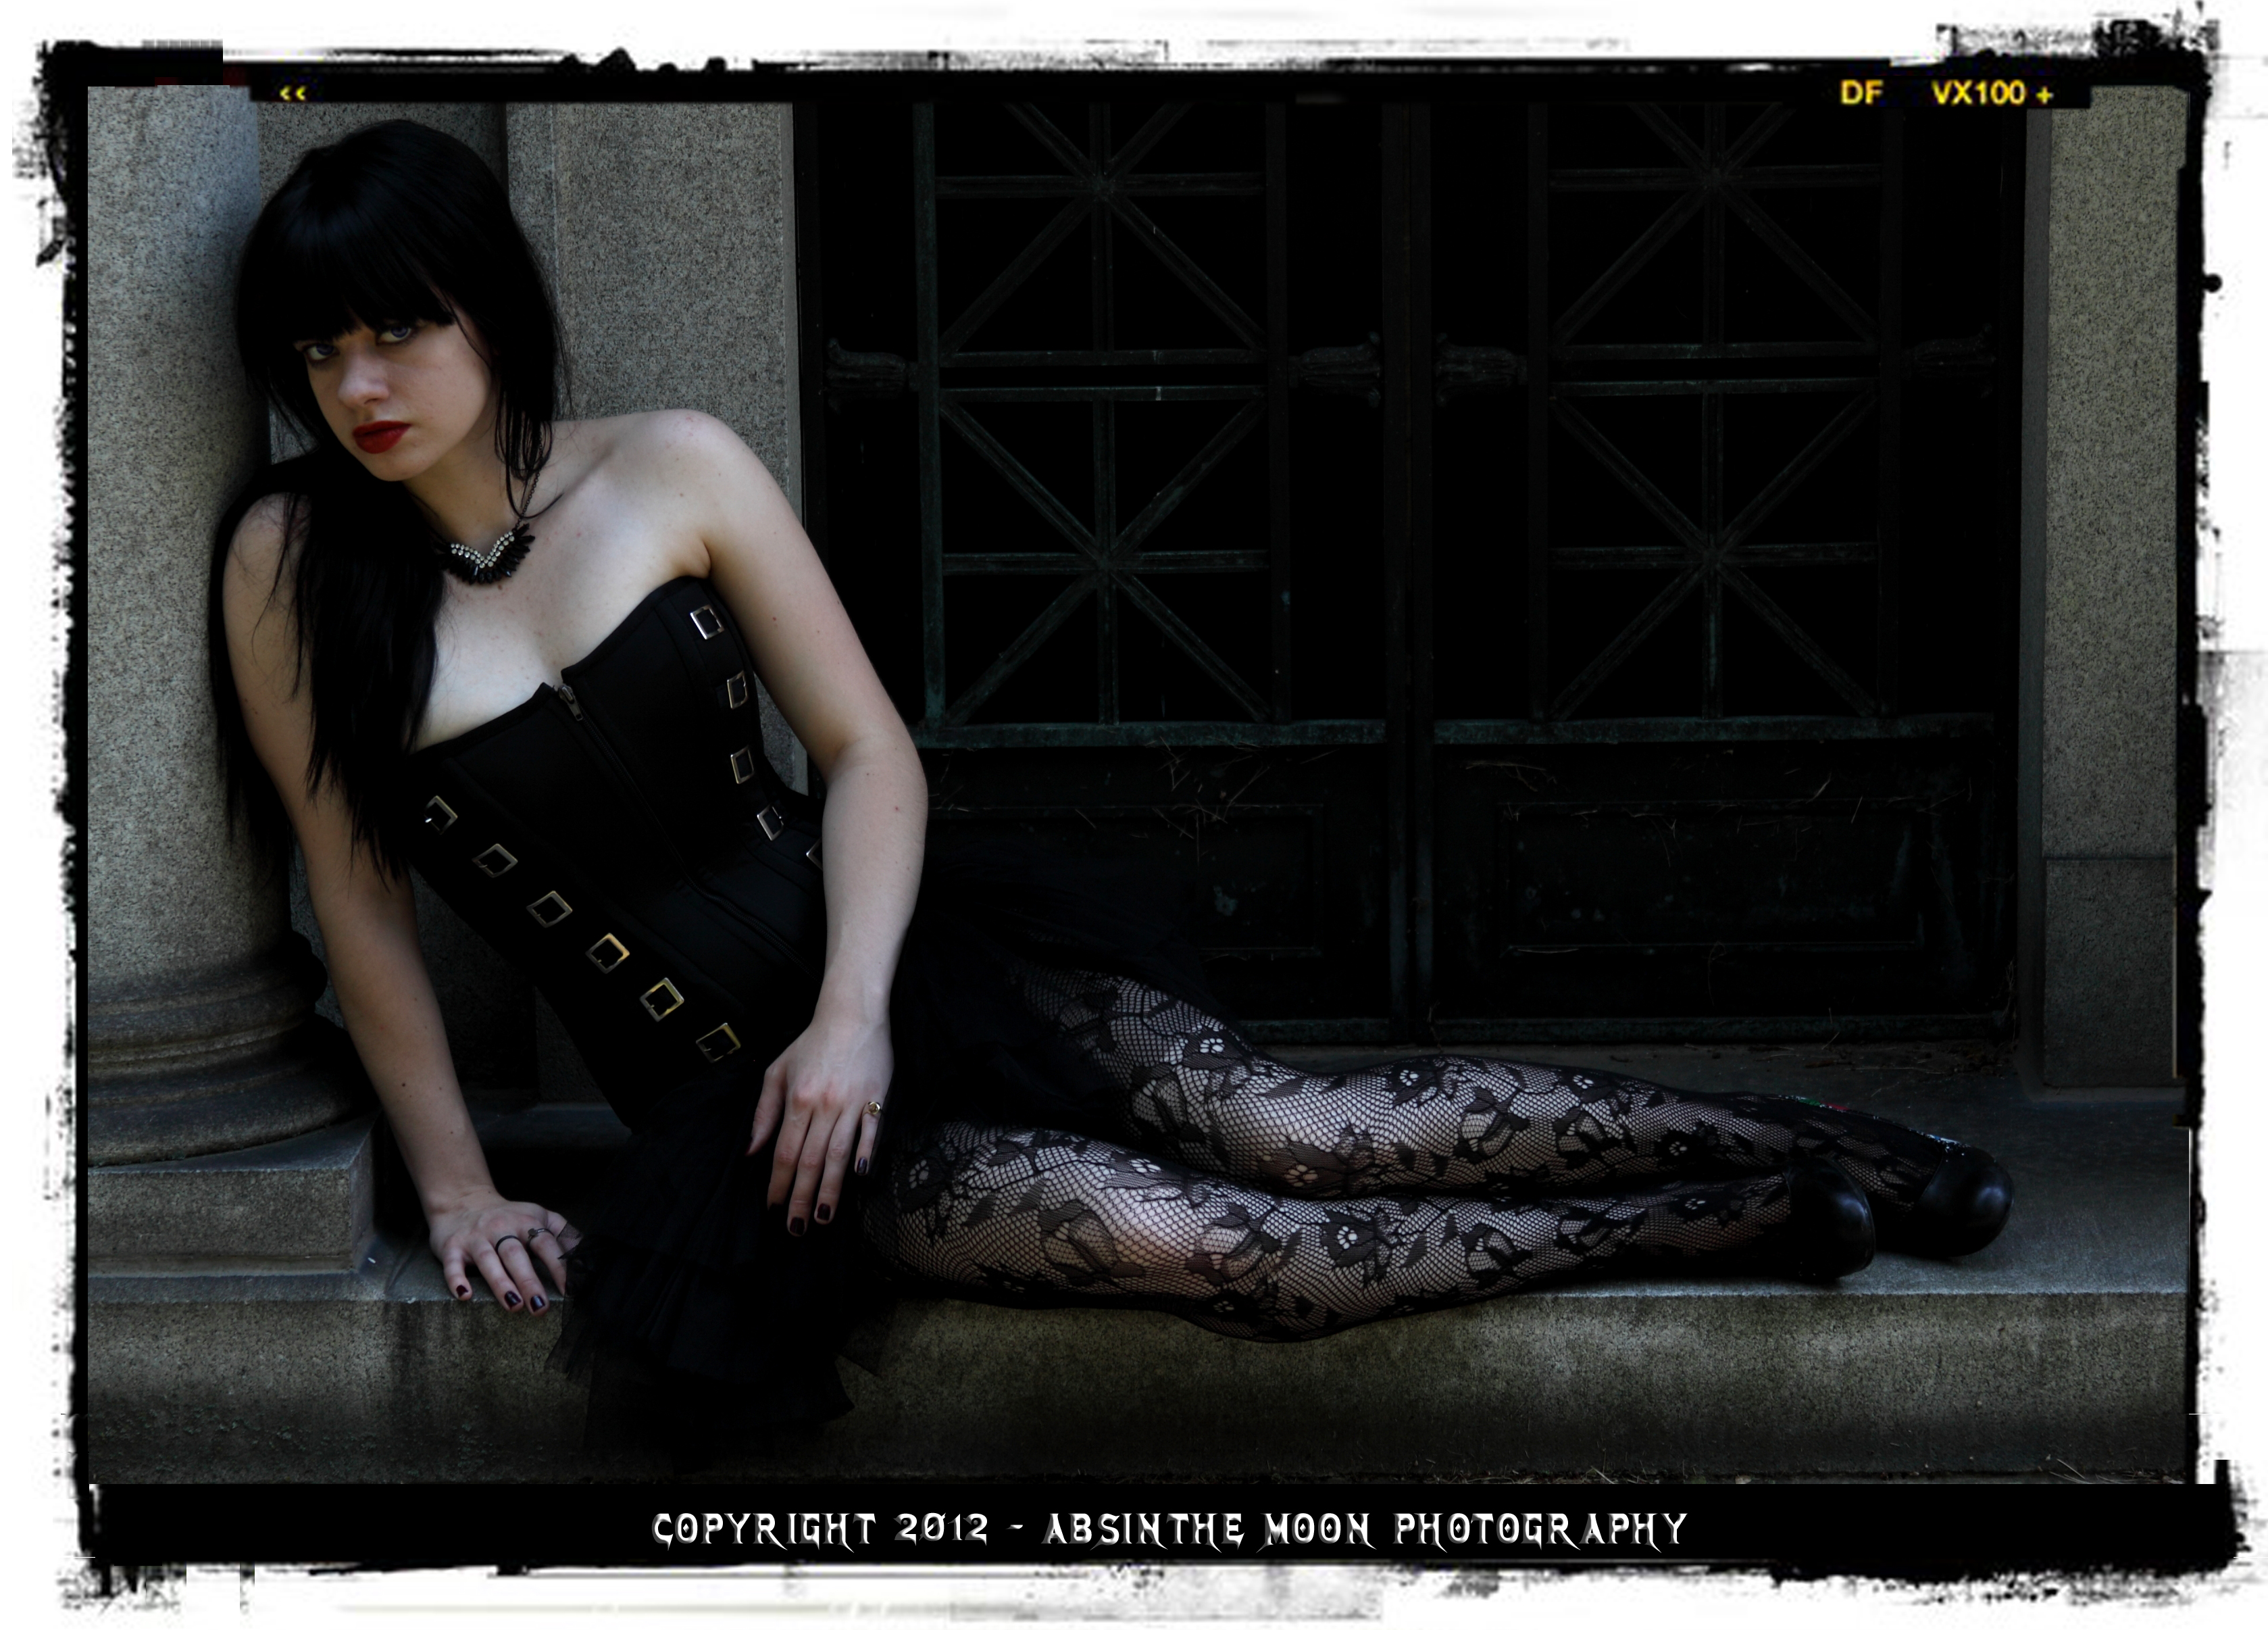 Photo By: Absinthe Moon Photography